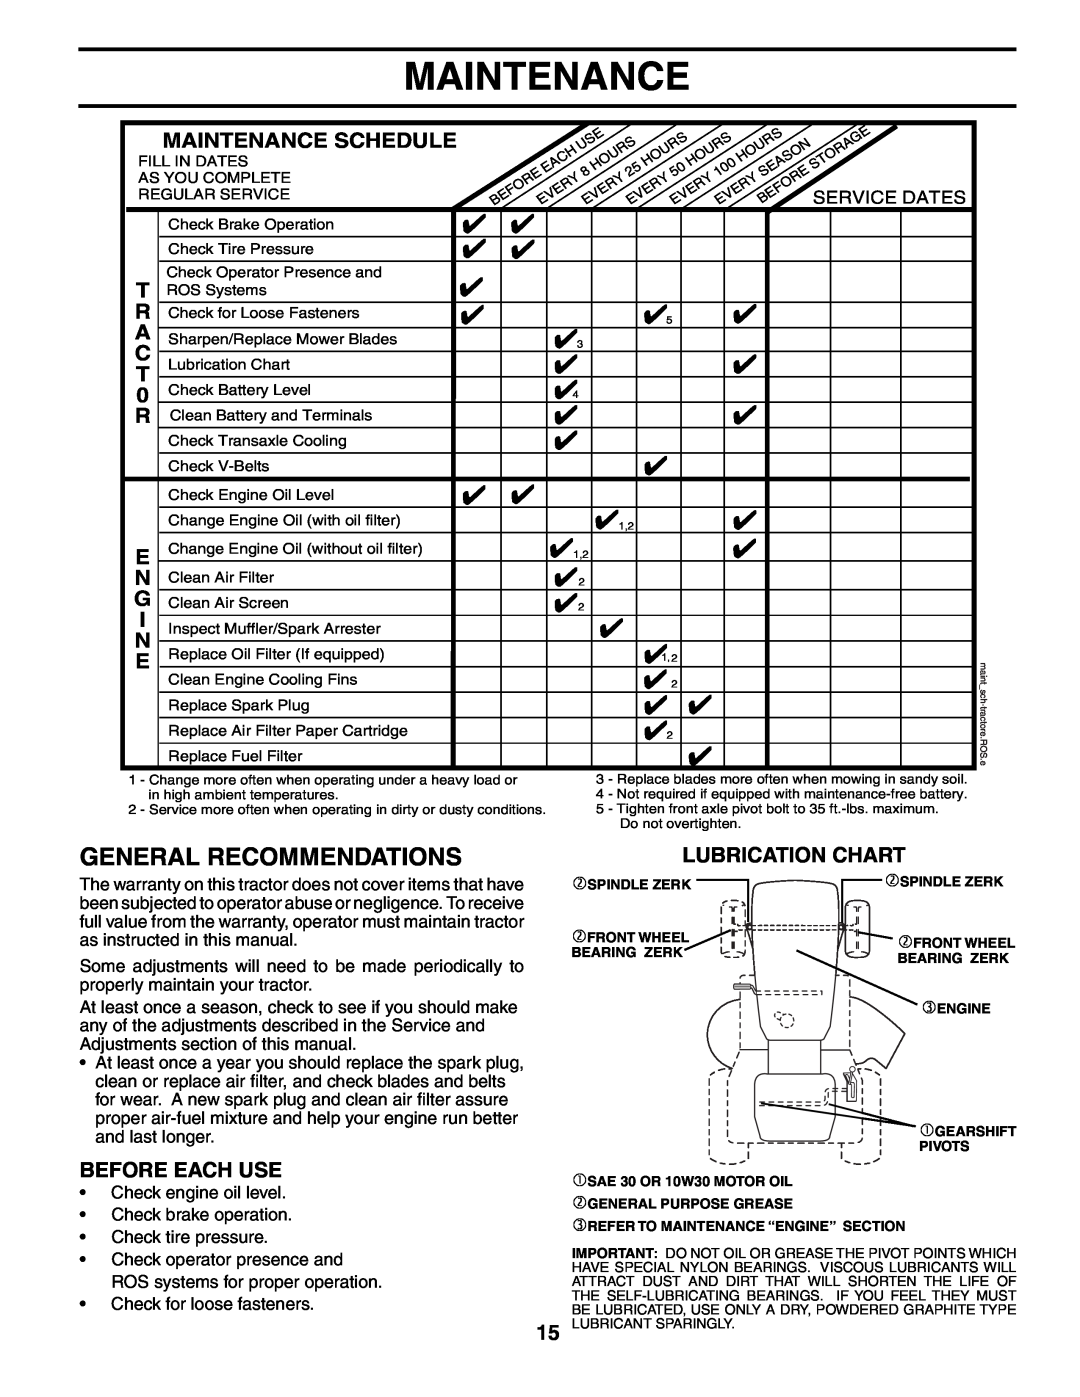 Poulan PD17542LT manual General Recommendations, Before Each Use, Lubrication Chart, Maintenance Schedule 